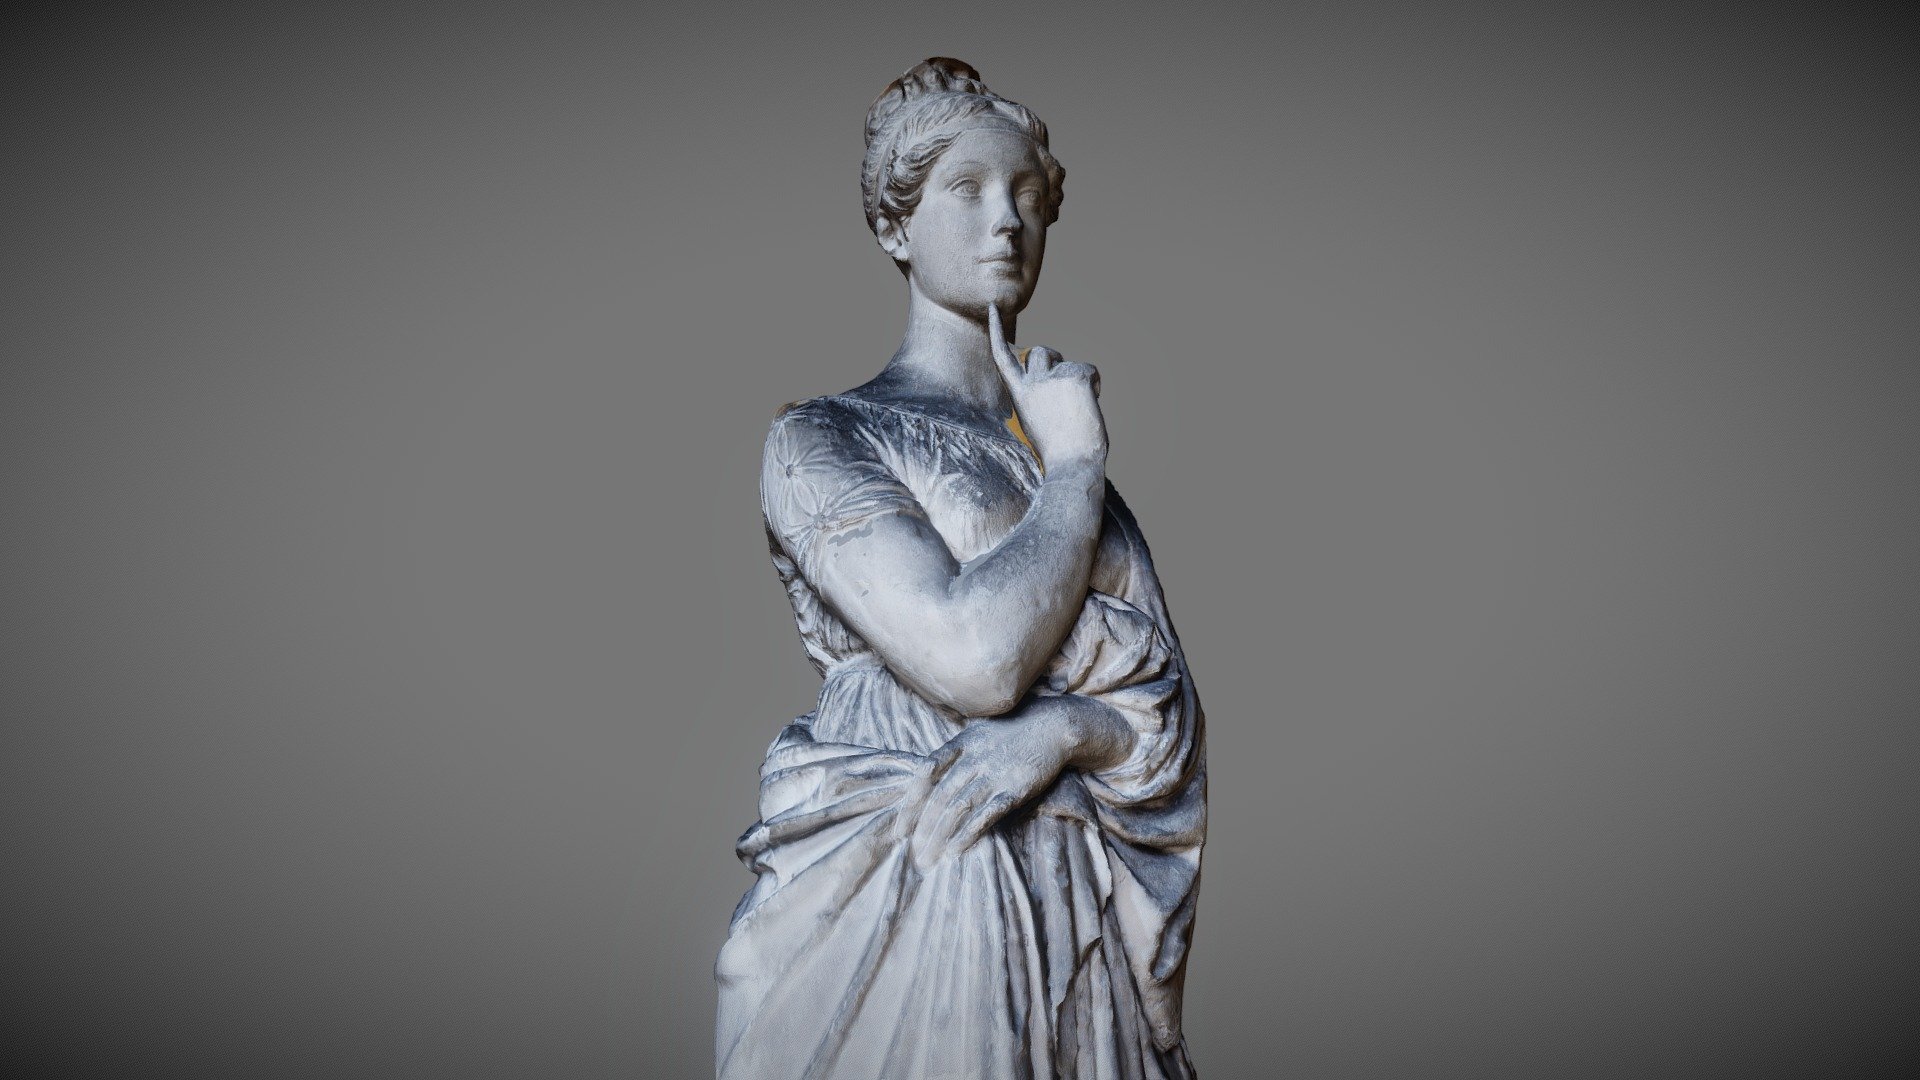 Maria Fjodorovna Barjatinskaja (1793 -1858), made in 1818, Bertel Thorvaldsen (1770 - 1844), plaster, height: 180 cm. Reference number: A172. Thorvaldsen museum (Copenhagen, Denmark). Made with ReMake and ReCap from AutoDesk.

The Russian Princess Maria Barjatinskaja came to Rome in 1818 with her husband. At his wish, she was modelled by Thorvaldsen. The marble sculpture was created in 1821-25, but was never delivered. After the Princess’s death, her family demanded to have the statue handed over, but instead accepted a copy made by Thorvaldsen’s most important Danish apprentice, the sculptor H. W. Bissen. Today the sculpture is in the Pushkin Museum in Moscow.

For more updates, please follow @GeoffreyMarchal on Twitter 3d model